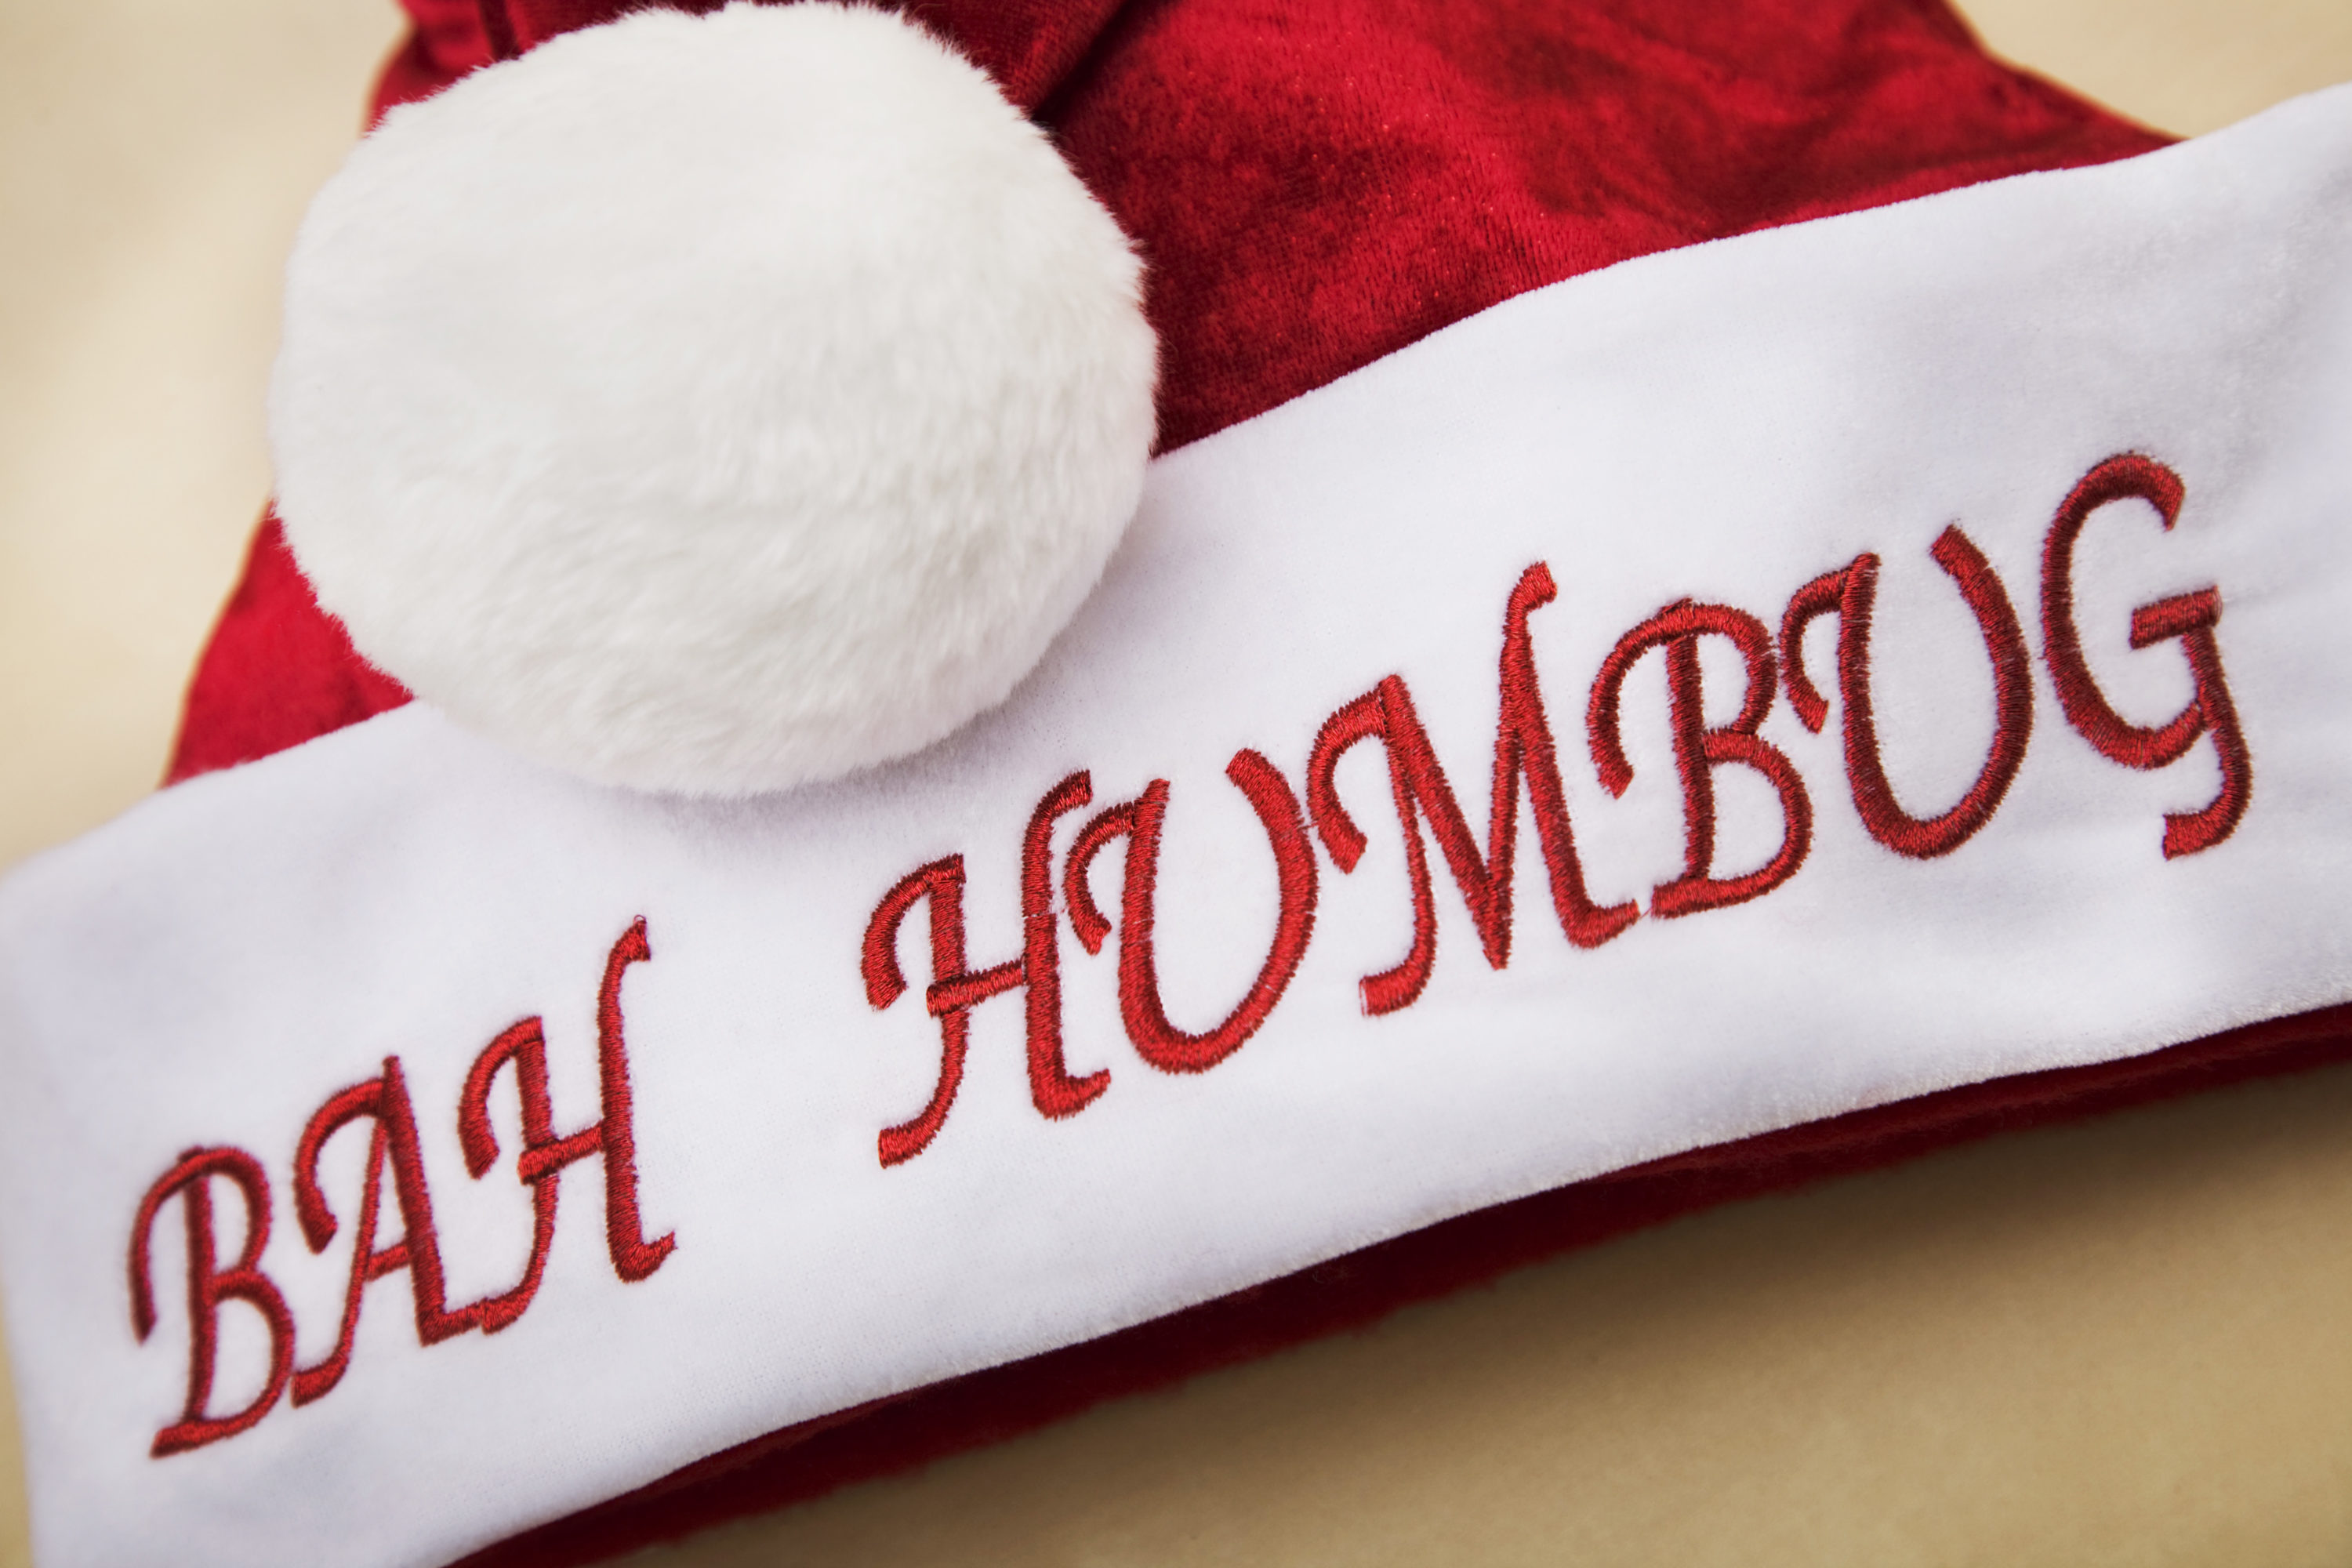 Humbug Day - A day to let out your fustration about the holiday just like Ebenezer Scrooge. "“Bah! Humbug!”" #HumbugDay #BahHumbug